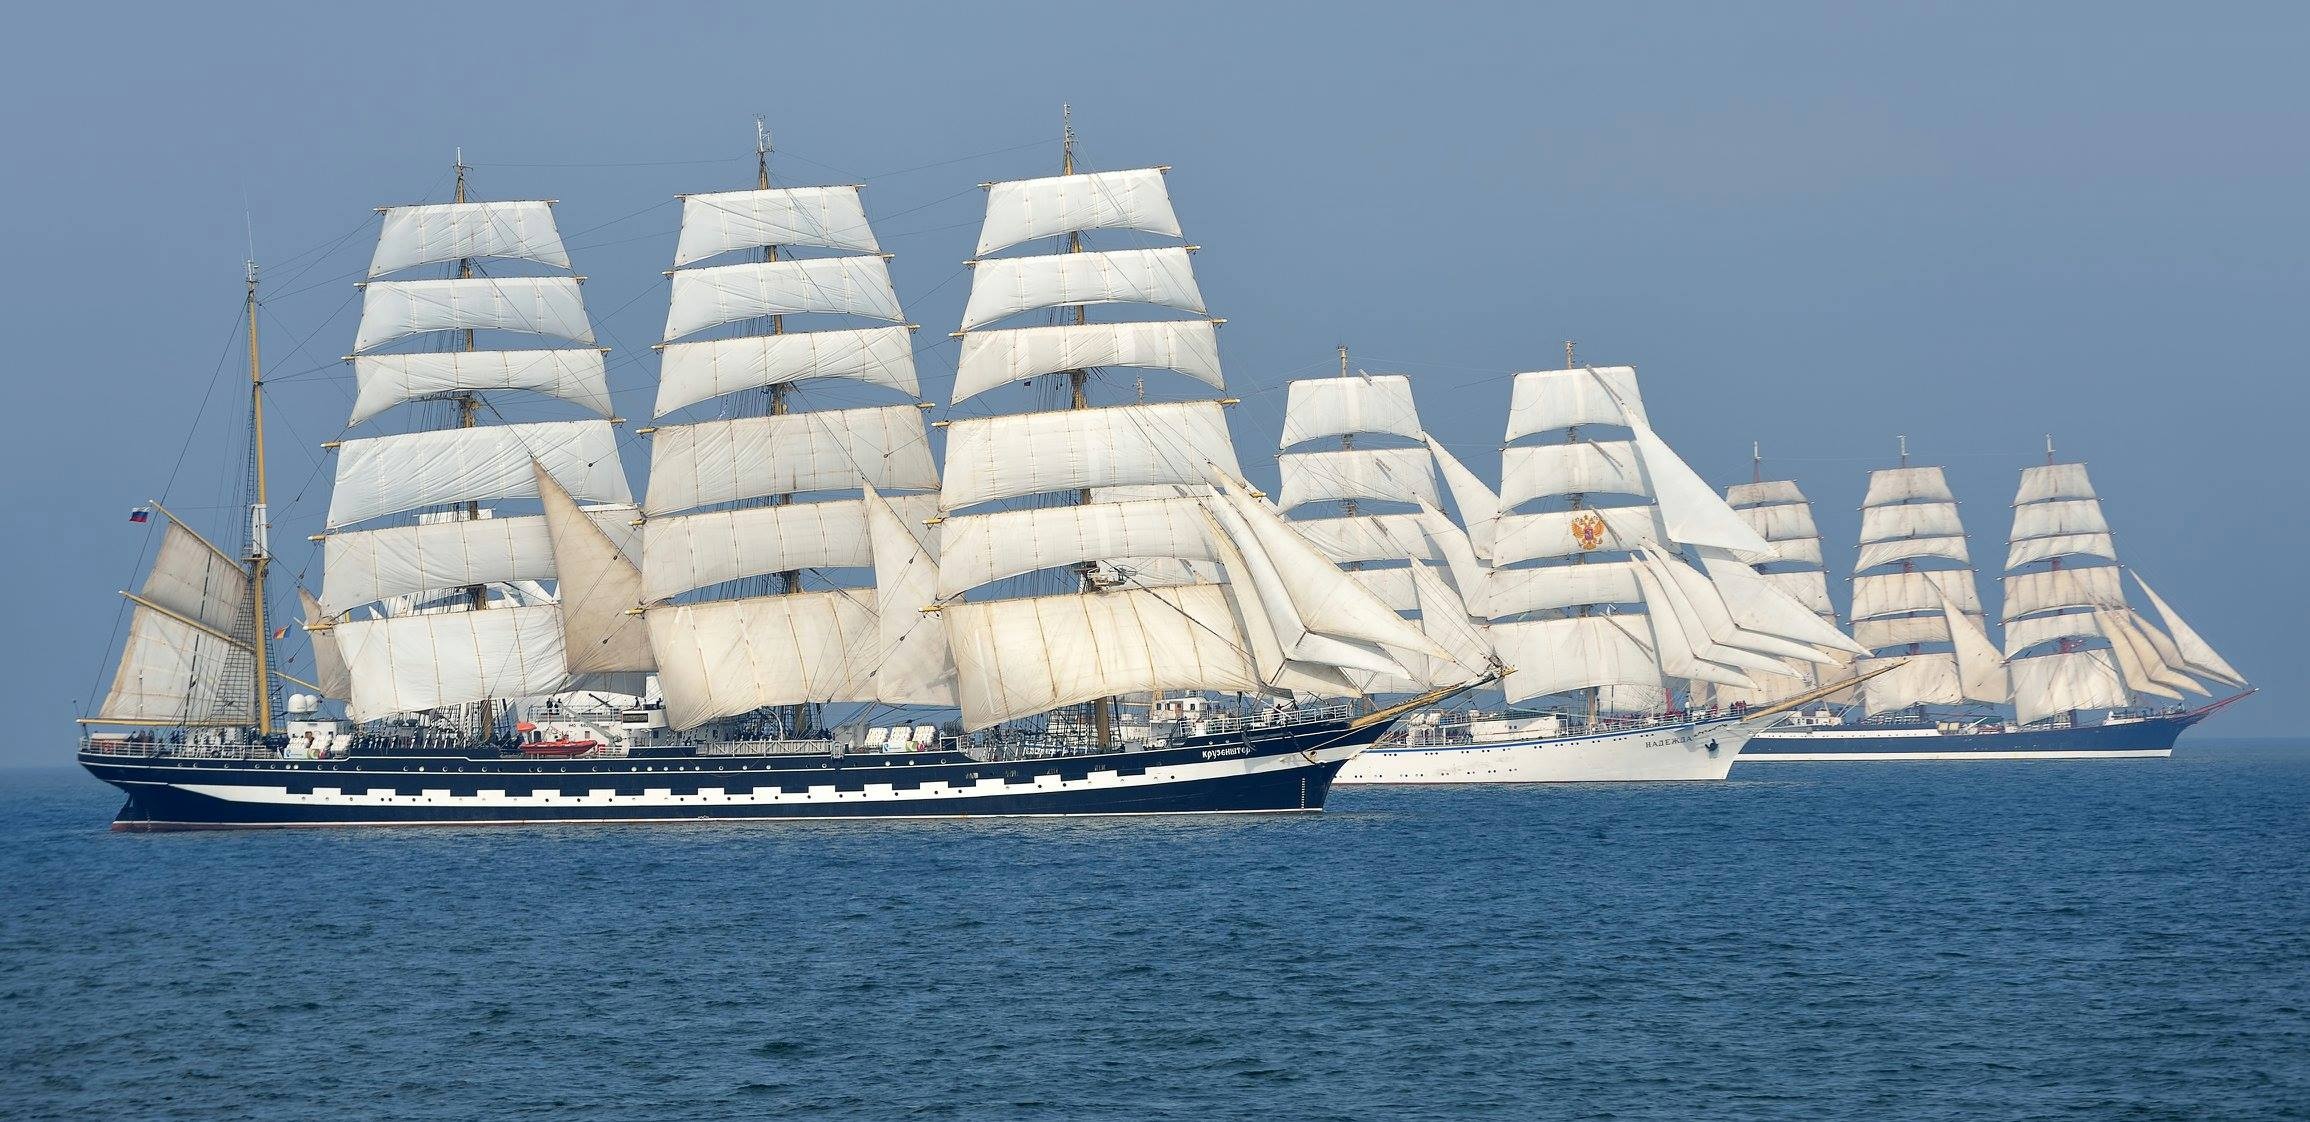 Windjammer: The grandest of merchant sailing ships, with between three and five large masts and square sails, Tartus port. 2310x1130 Dual Screen Wallpaper.